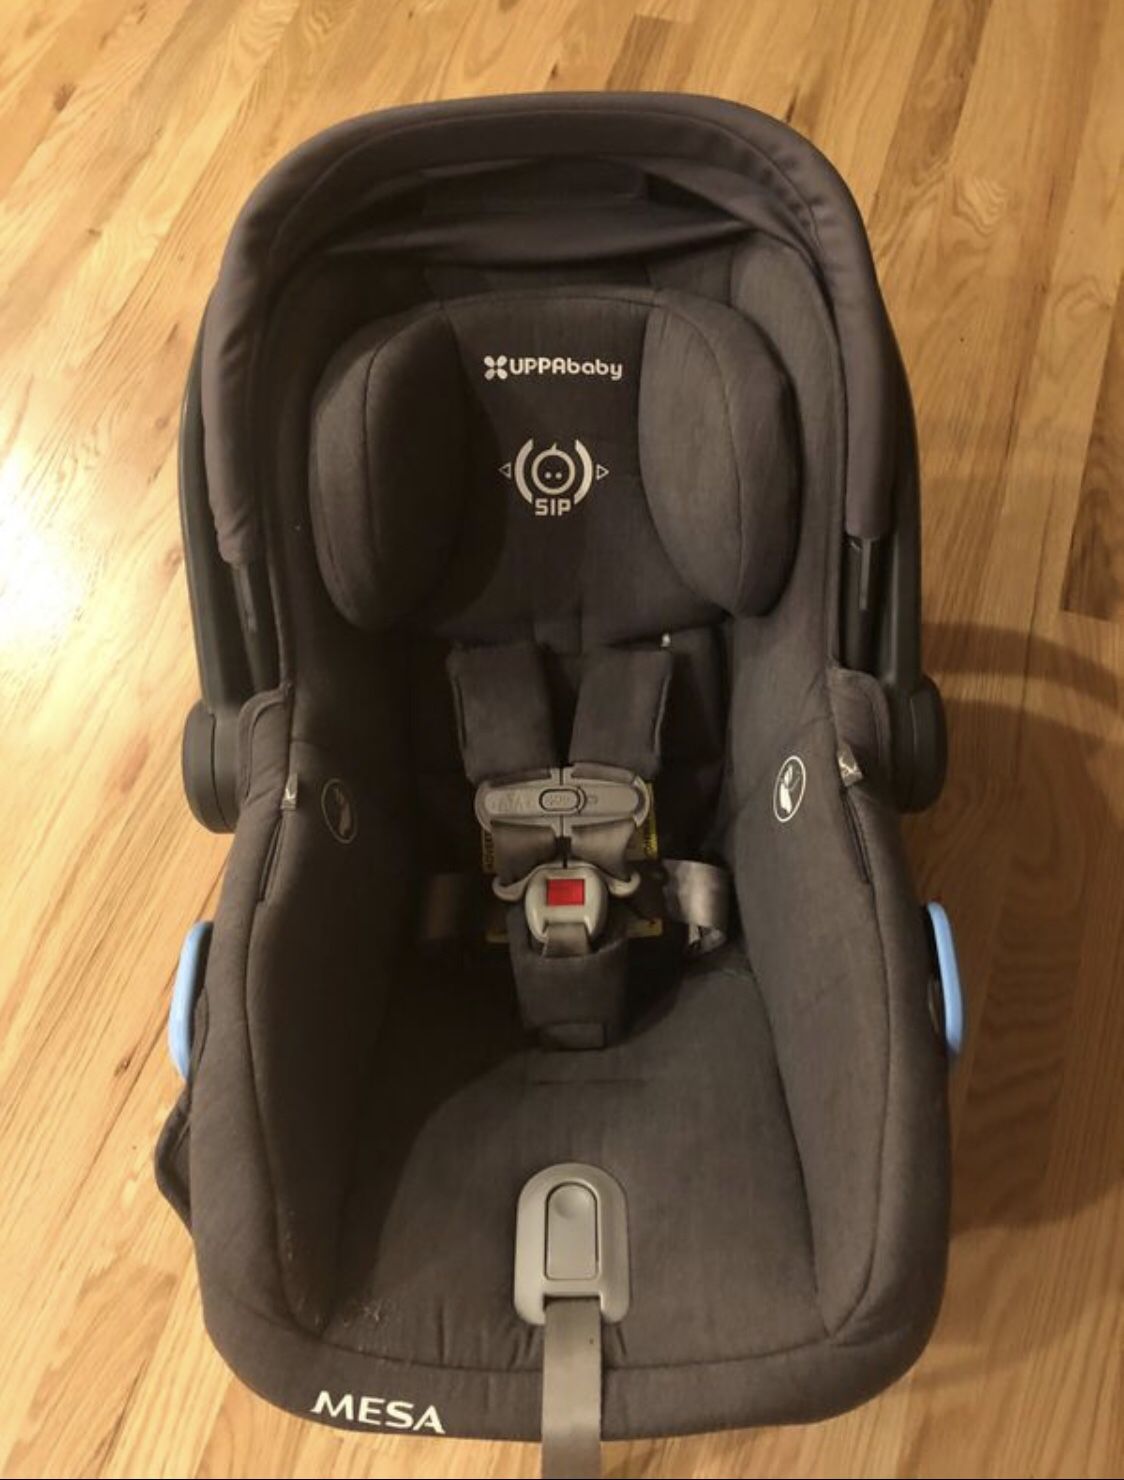 Uppababy Infant car seat